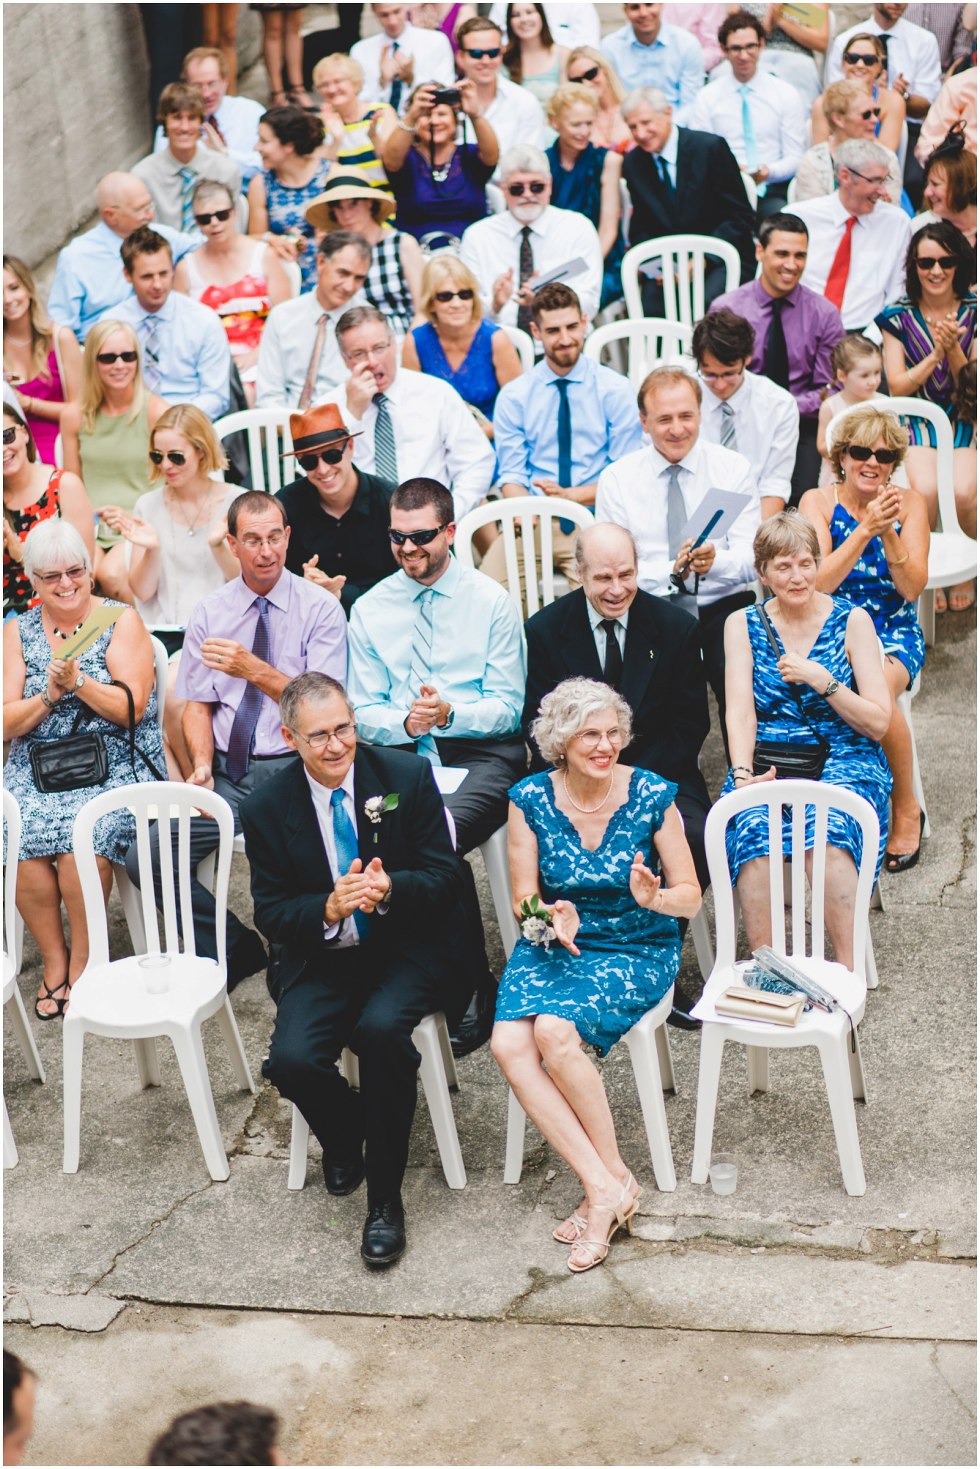 Guests smiling and clapping during the Goldie Mill Ruins wedding ceremony